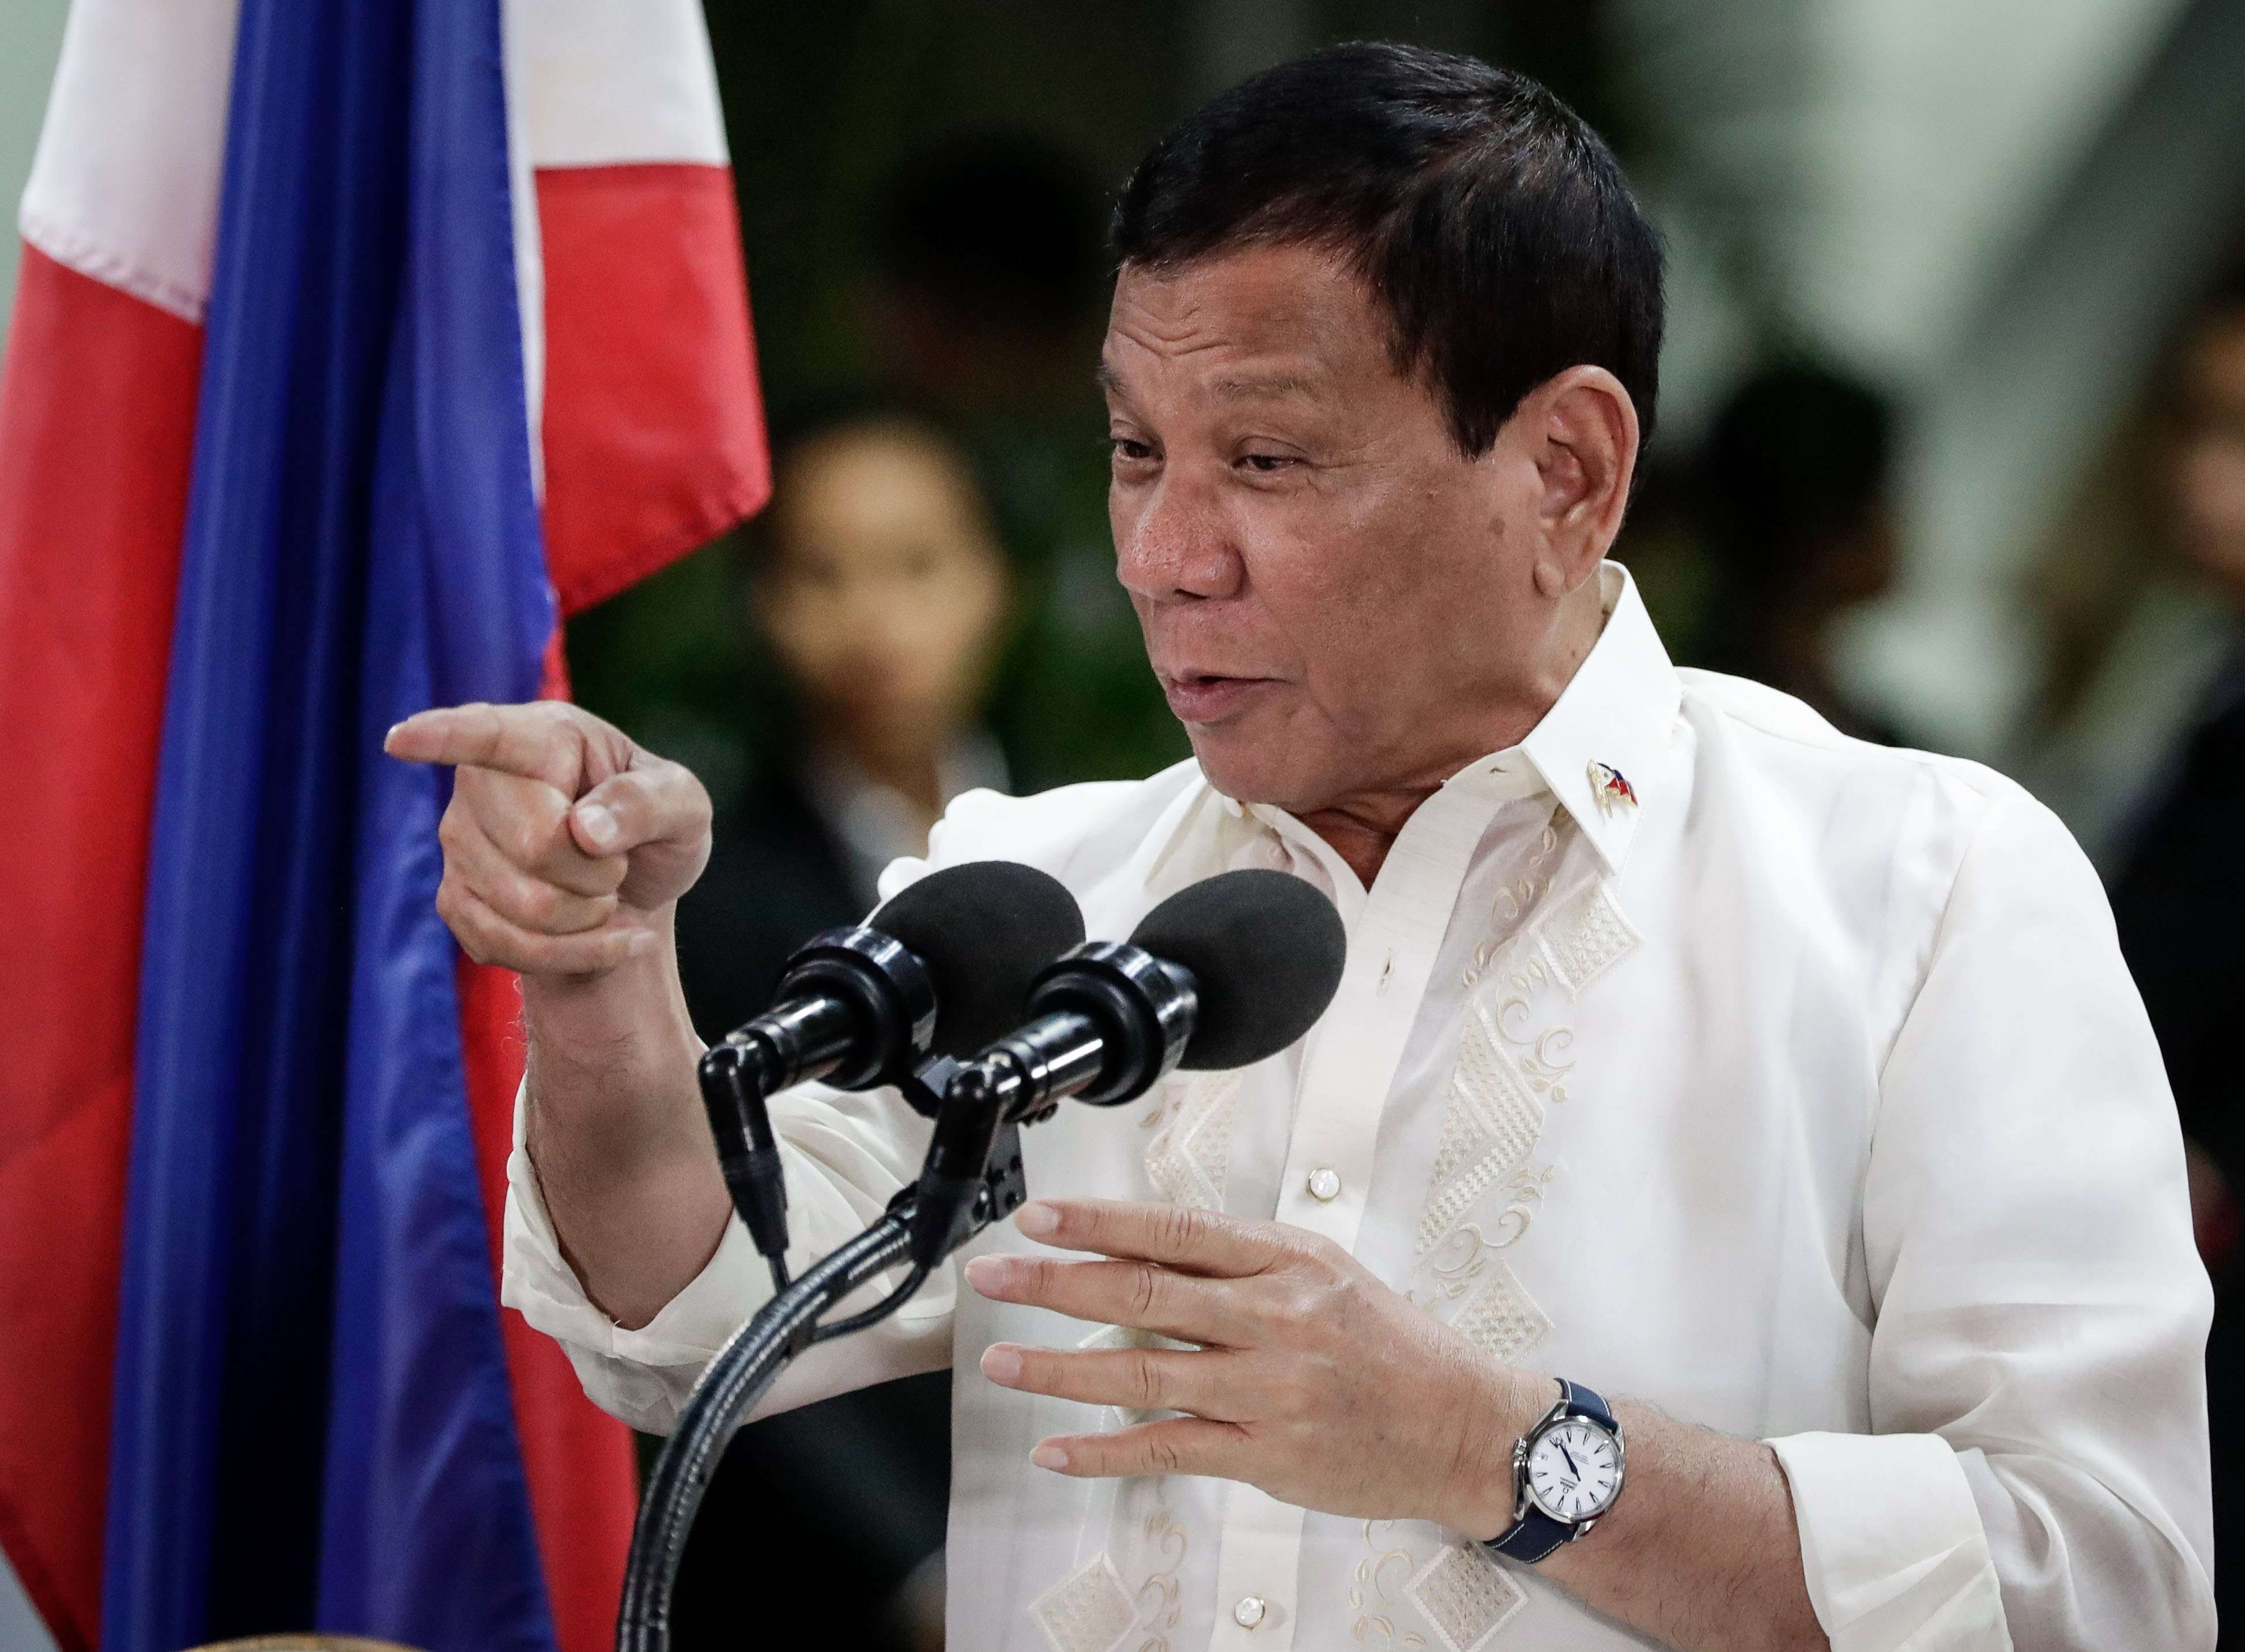 President Rodrigo Duterte went back on last year’s campaign promise to push for same-sex union when he cited the Philippine Civil Code in March to say marriage is the union between a man and a woman. Photo: EPA